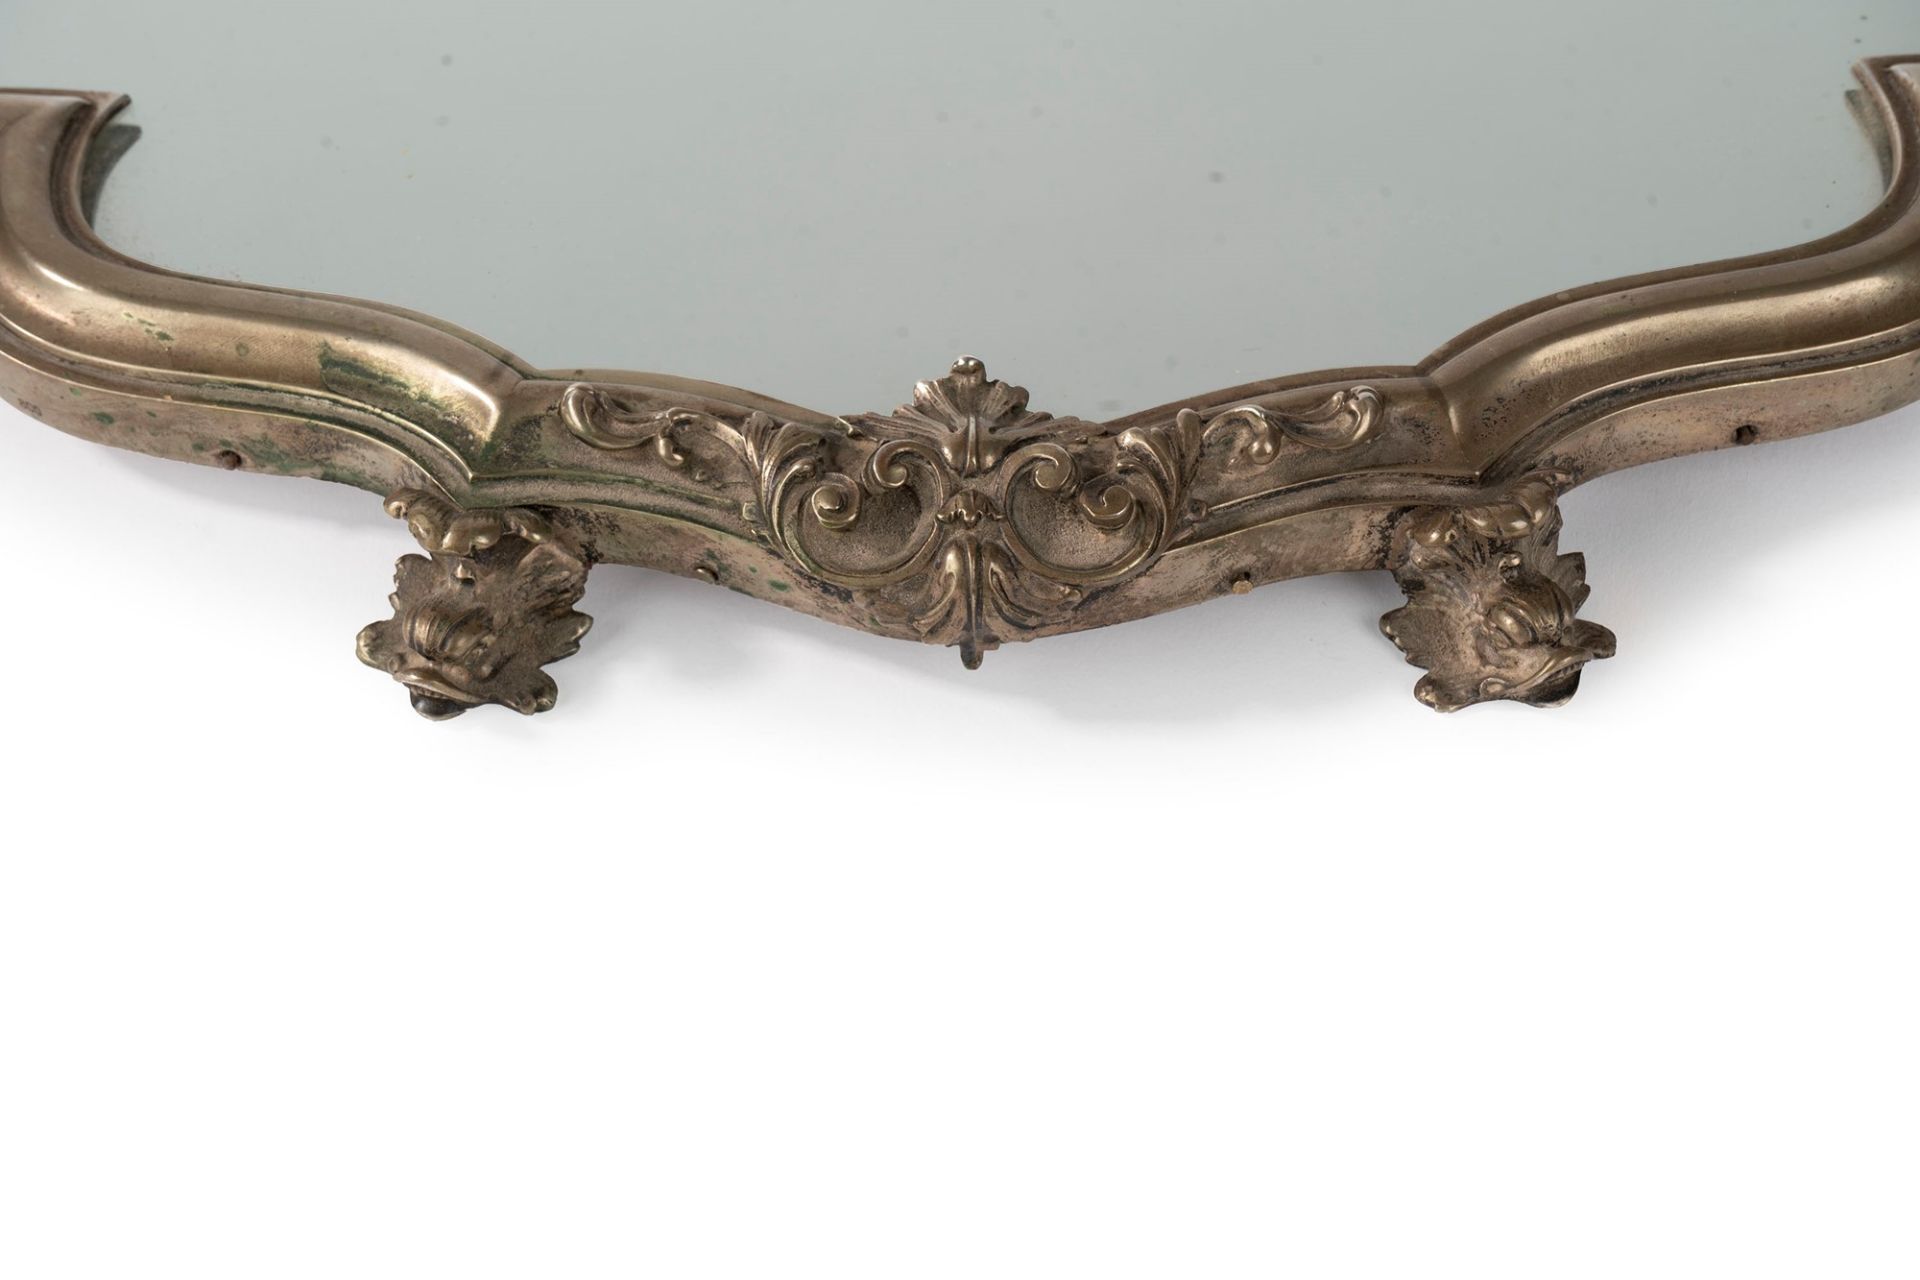 Silver tray with mirror, 19th-20th centuries - Image 2 of 3